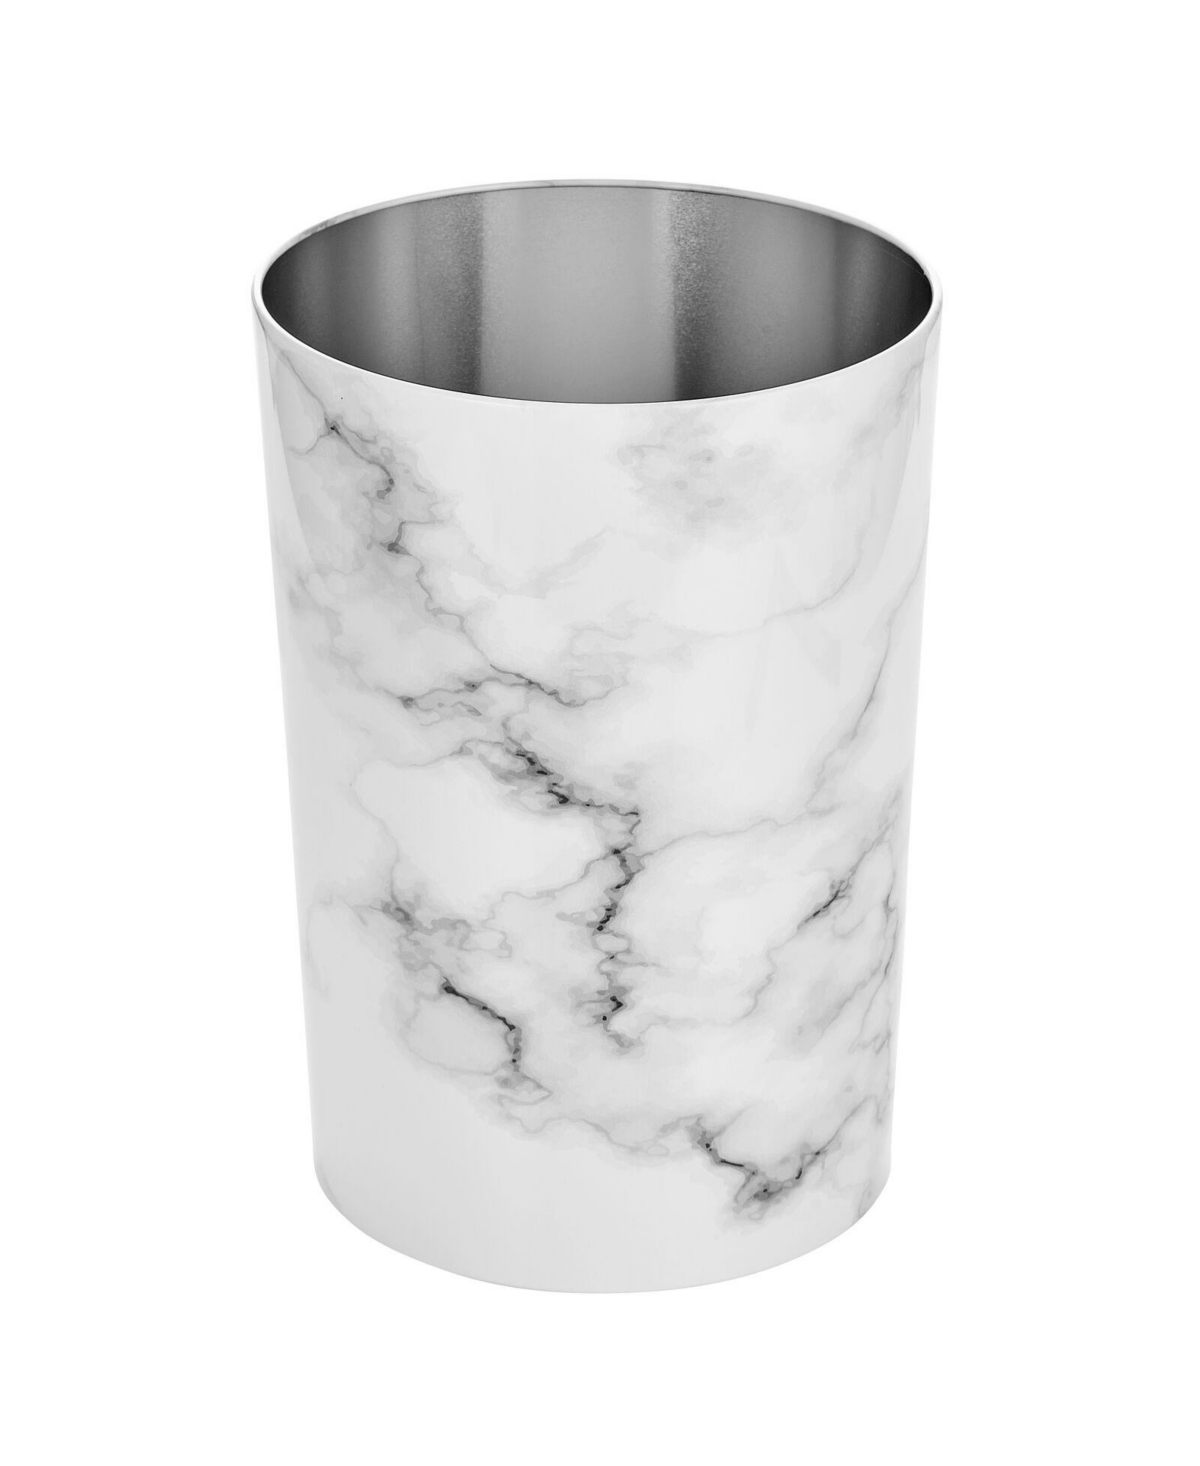 Round Metal Trash Wastebasket/Recycling Can - White marble